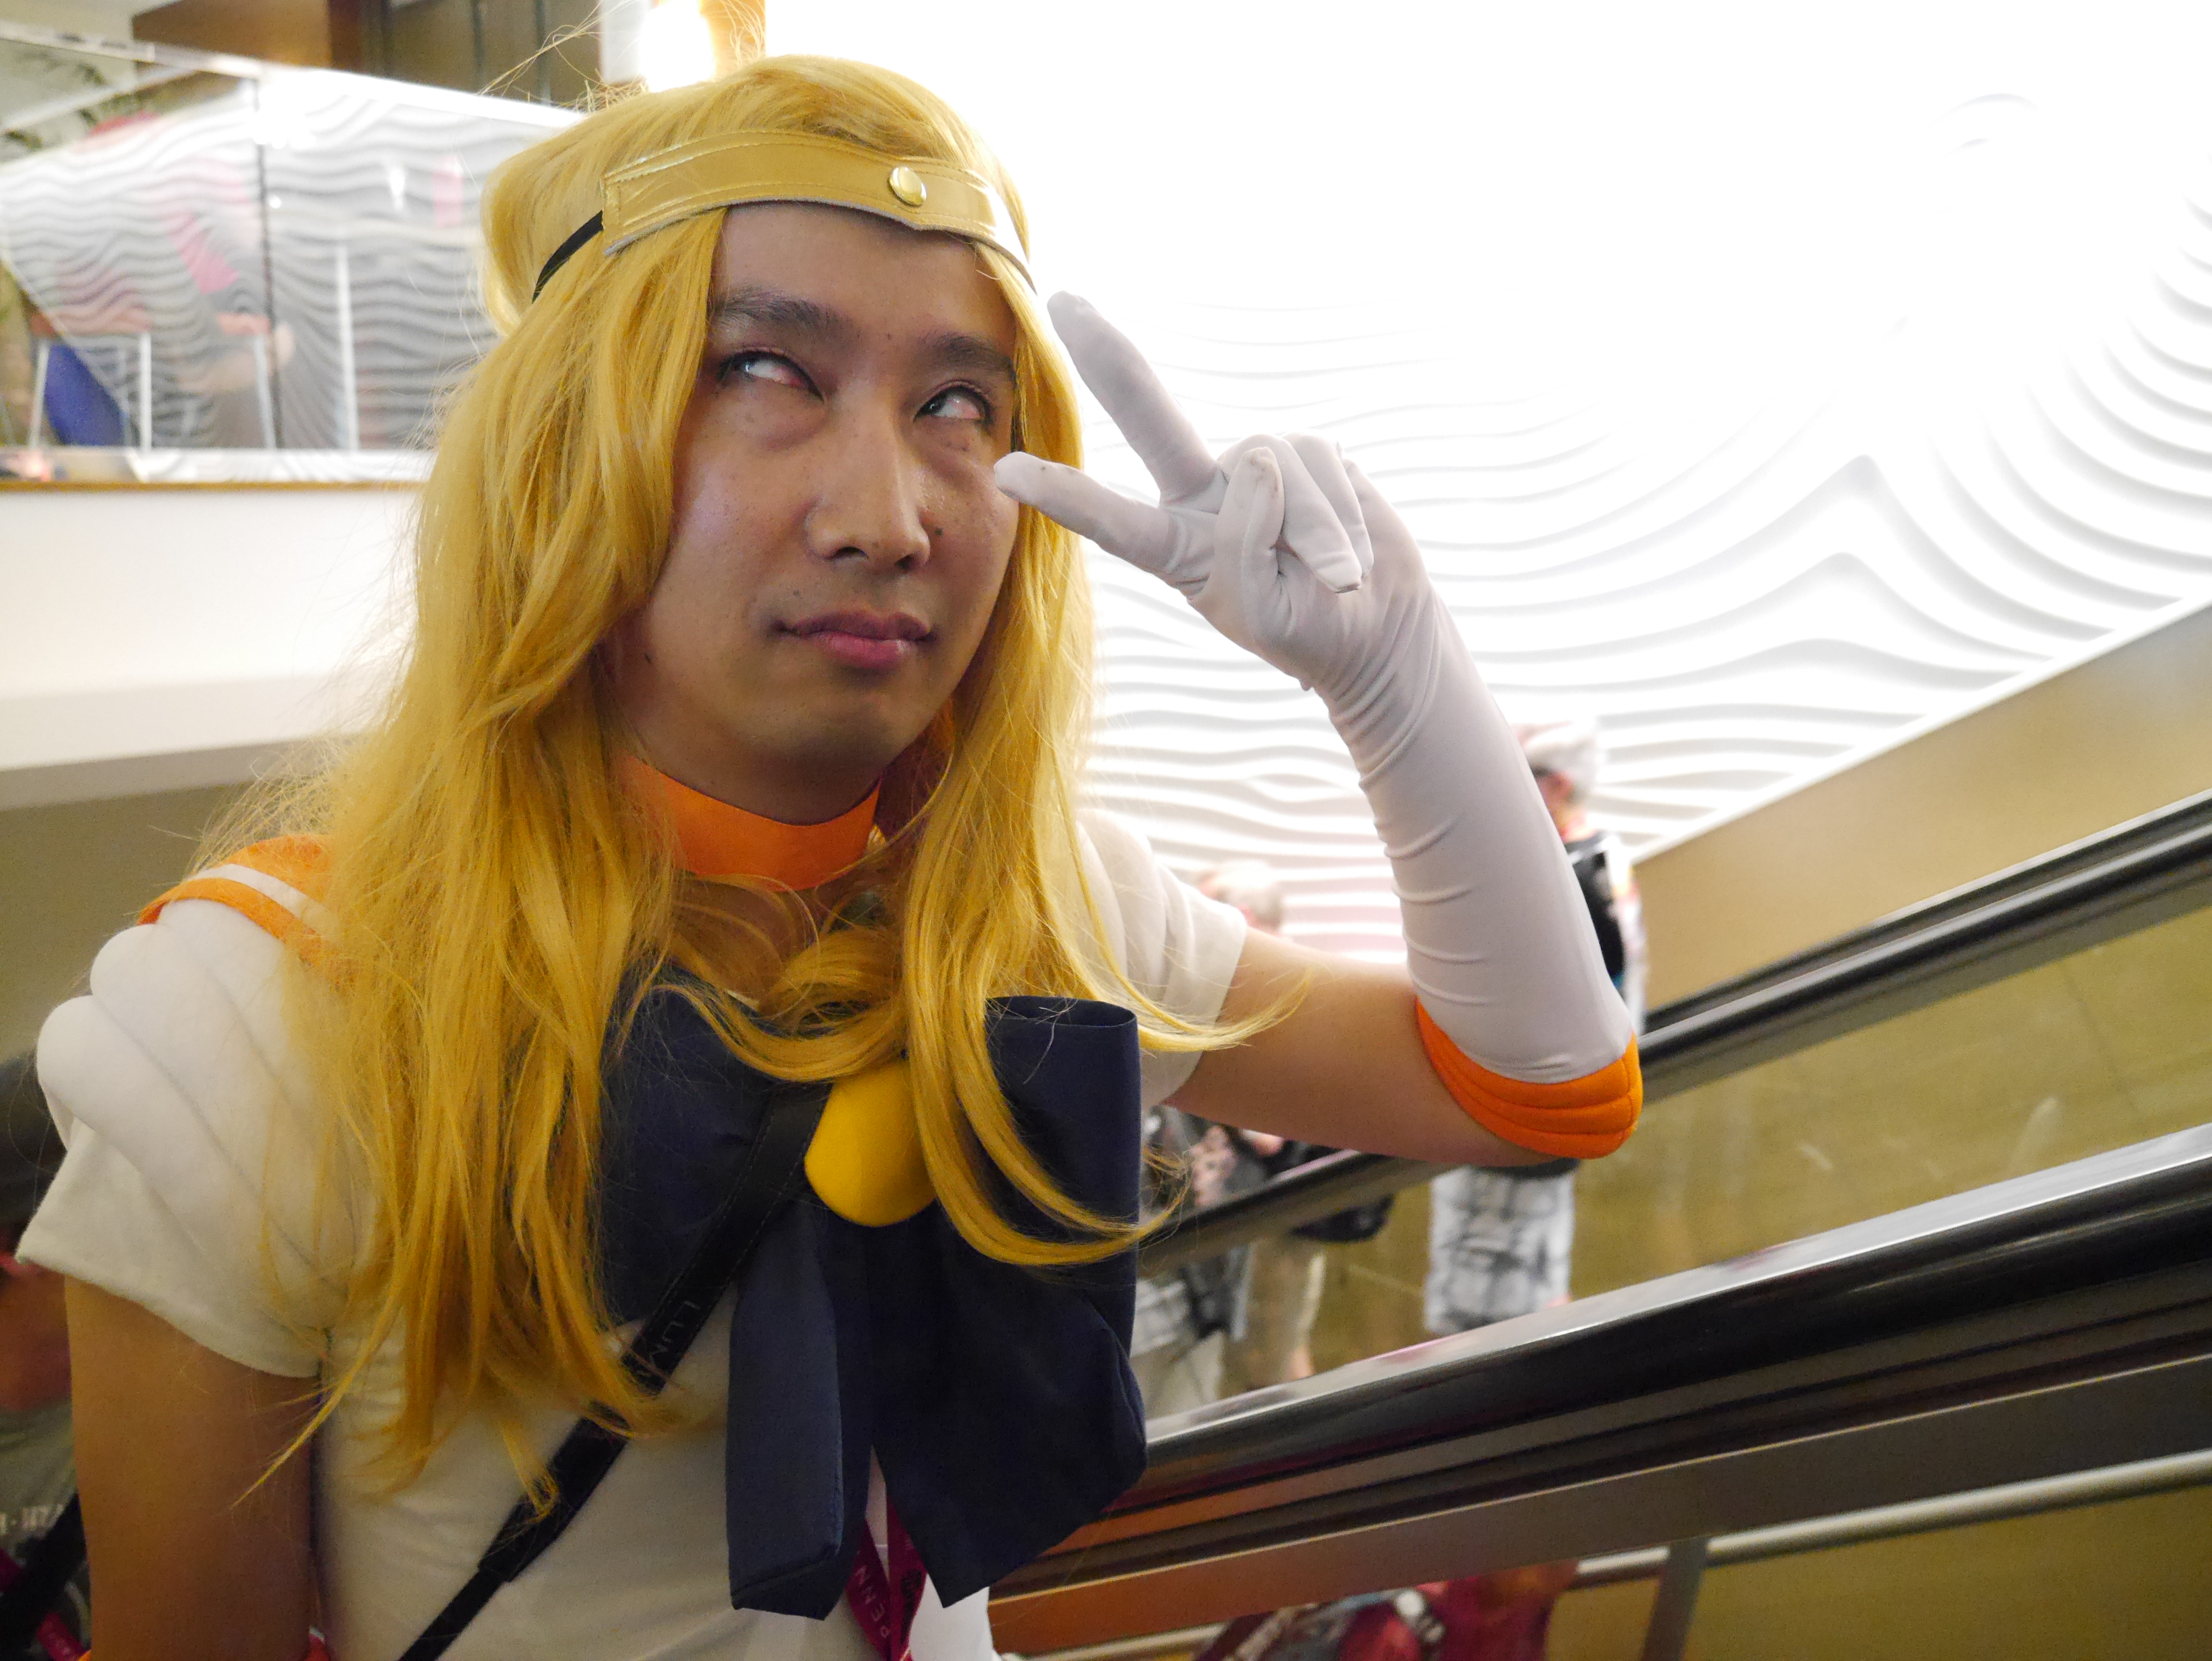 Our reporter goes looking for fans at Comic-Con…in his Sailor Venus cosplay  outfit